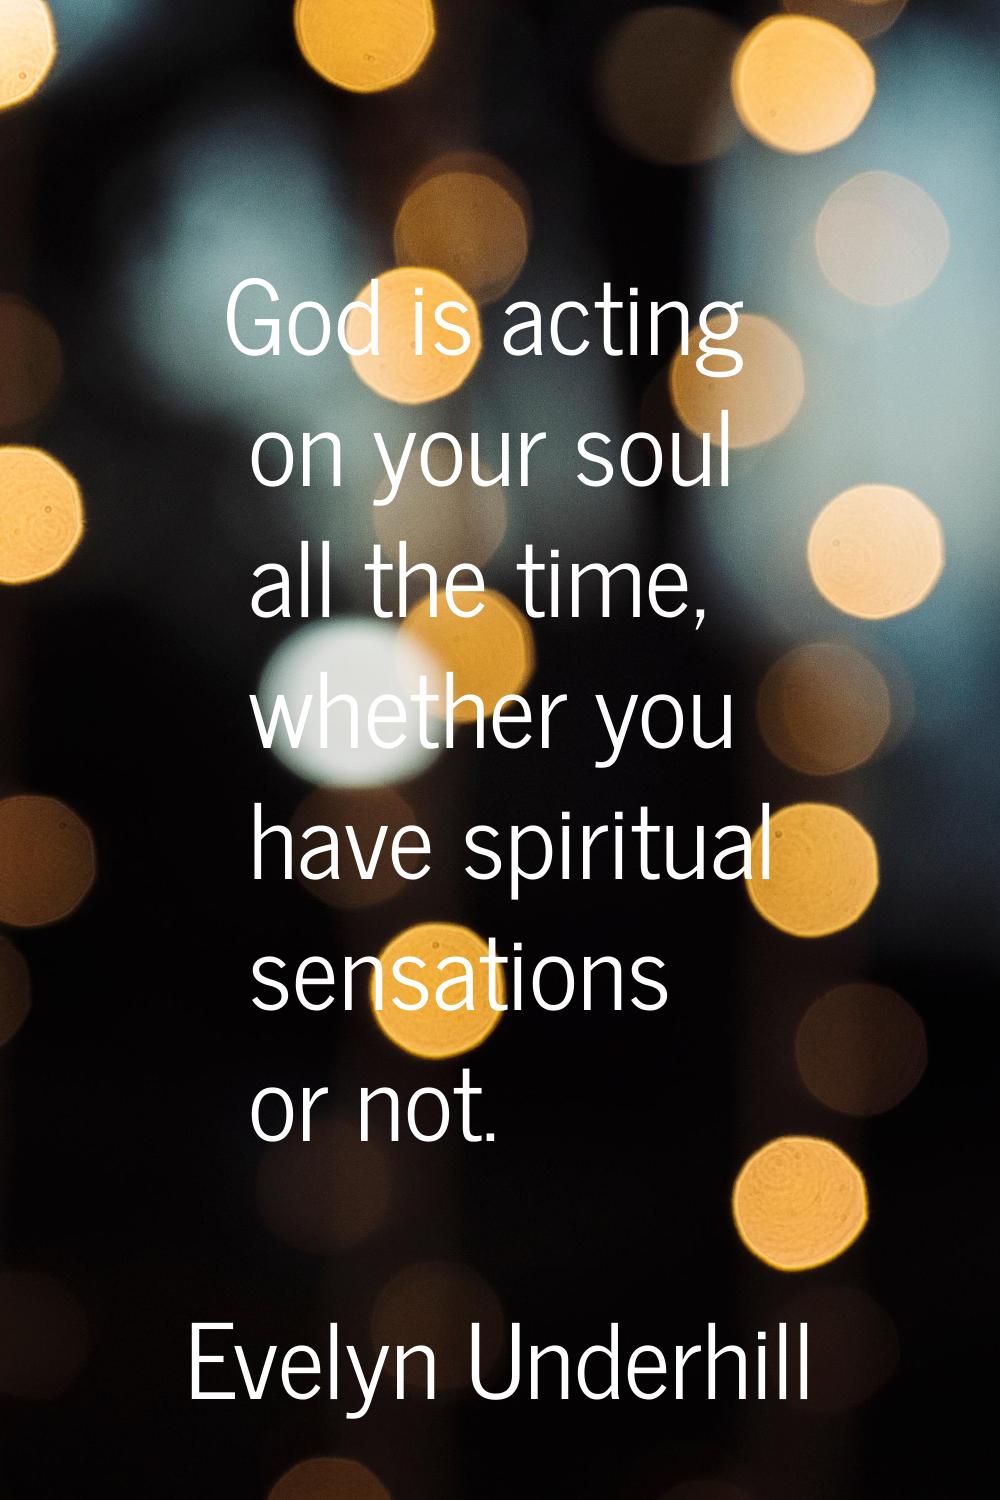 God is acting on your soul all the time, whether you have spiritual sensations or not.